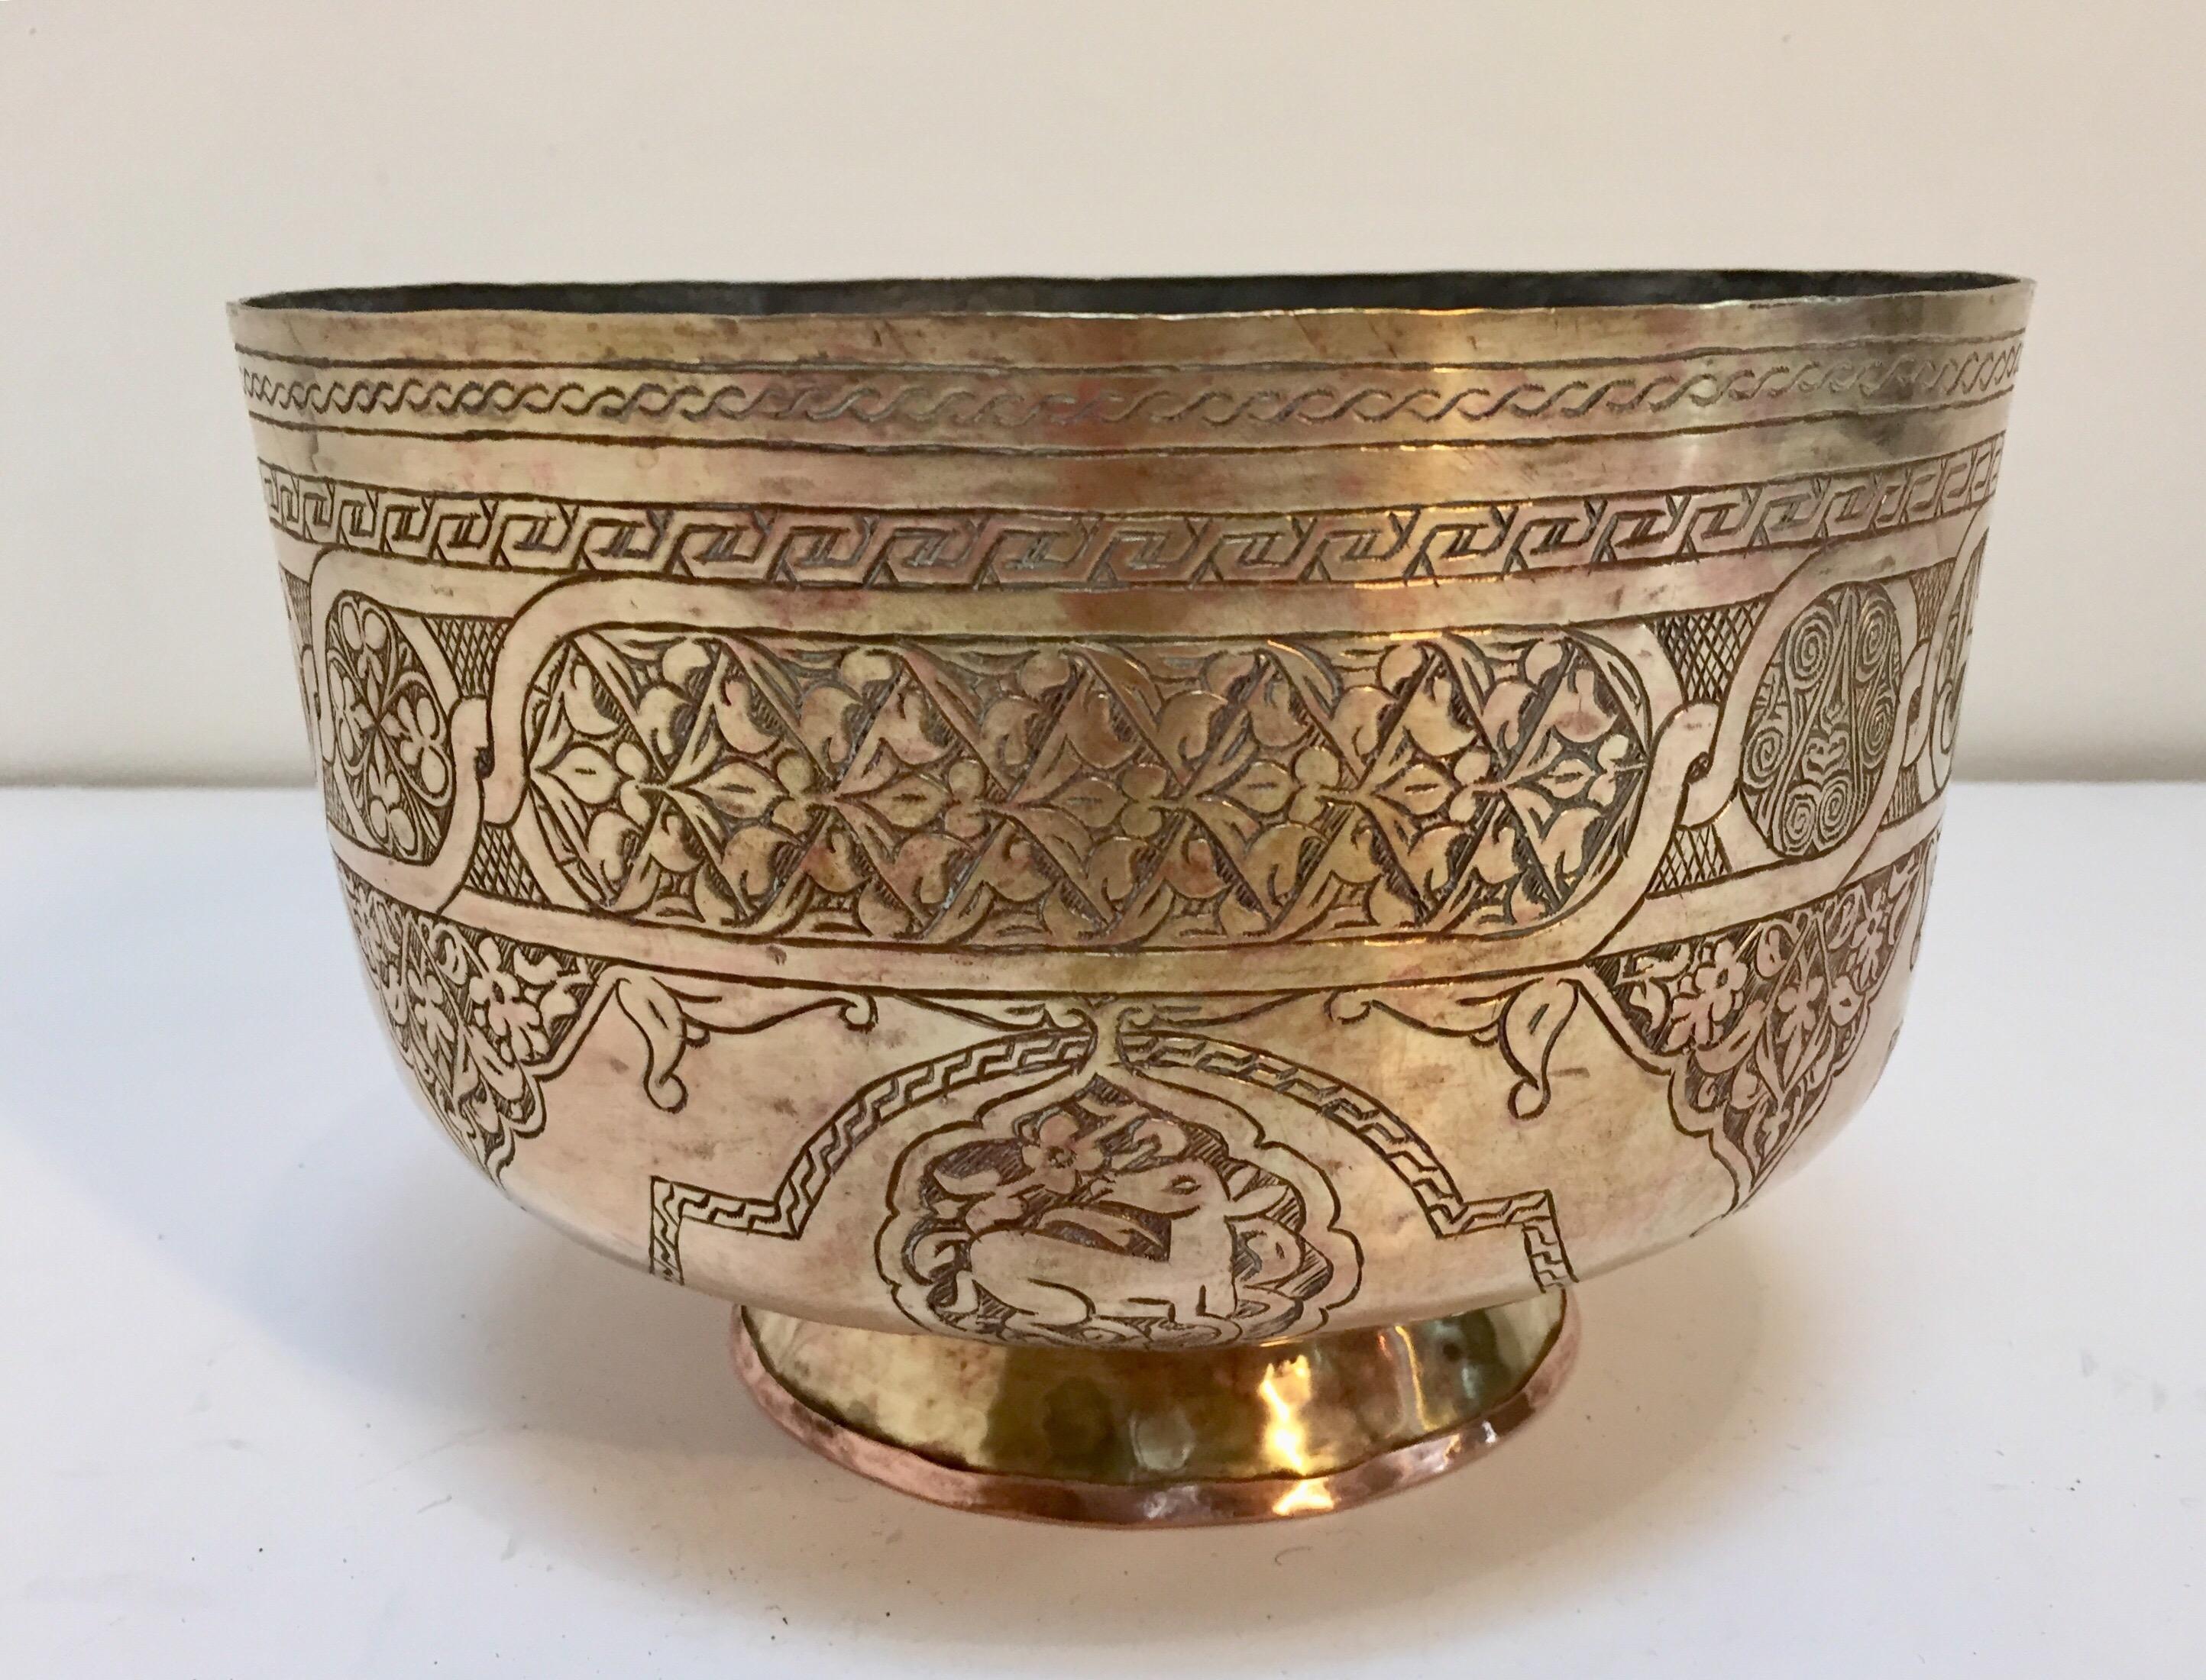 Large Middle Eastern Islamic finely hand-etched brass memorial footed bowl decorated with medallions with Islamic calligraphy inscriptions and scene of wild animals.
Moorish style heavy brass bowl could be used as a jardiniere for a large orchids